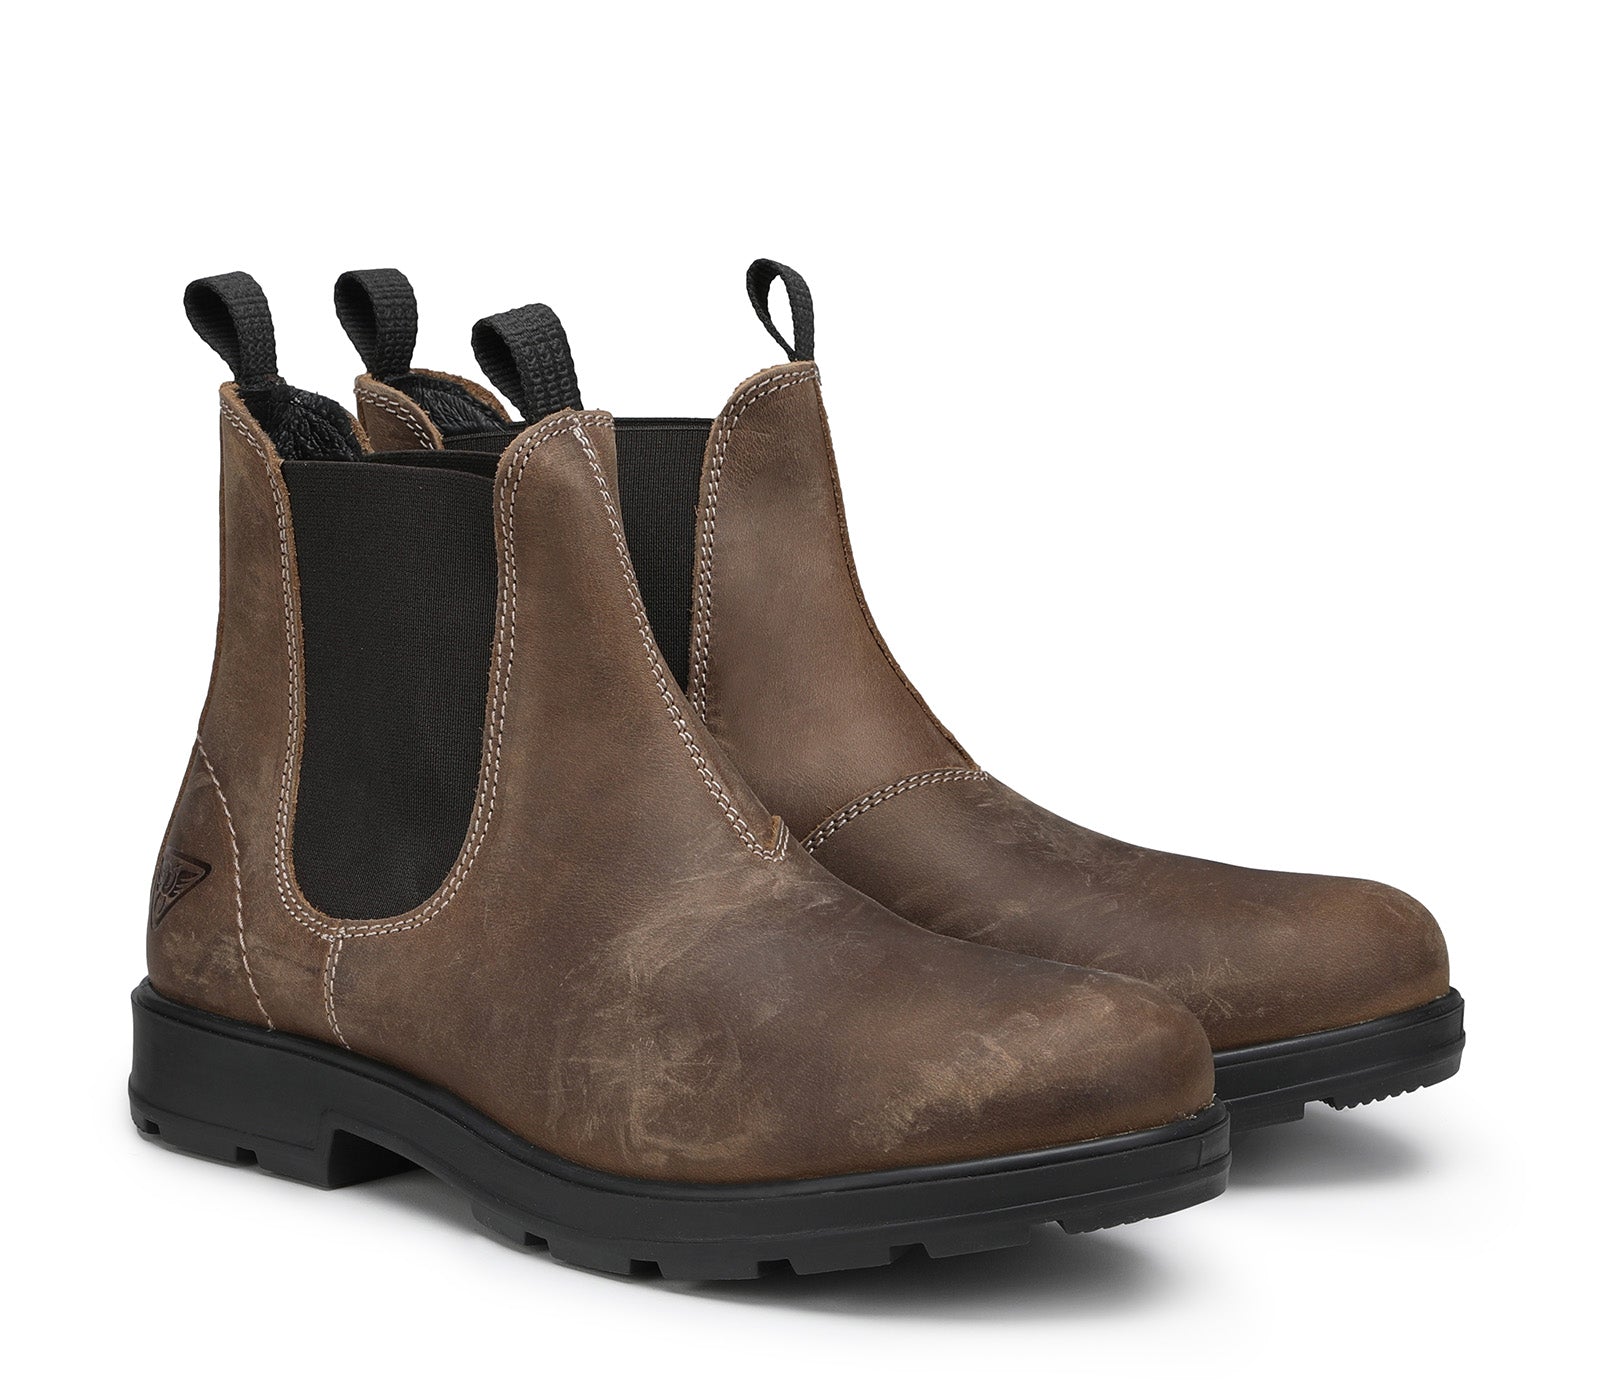 Brown Leather Men's Boots with Black Elasticized Side Inserts